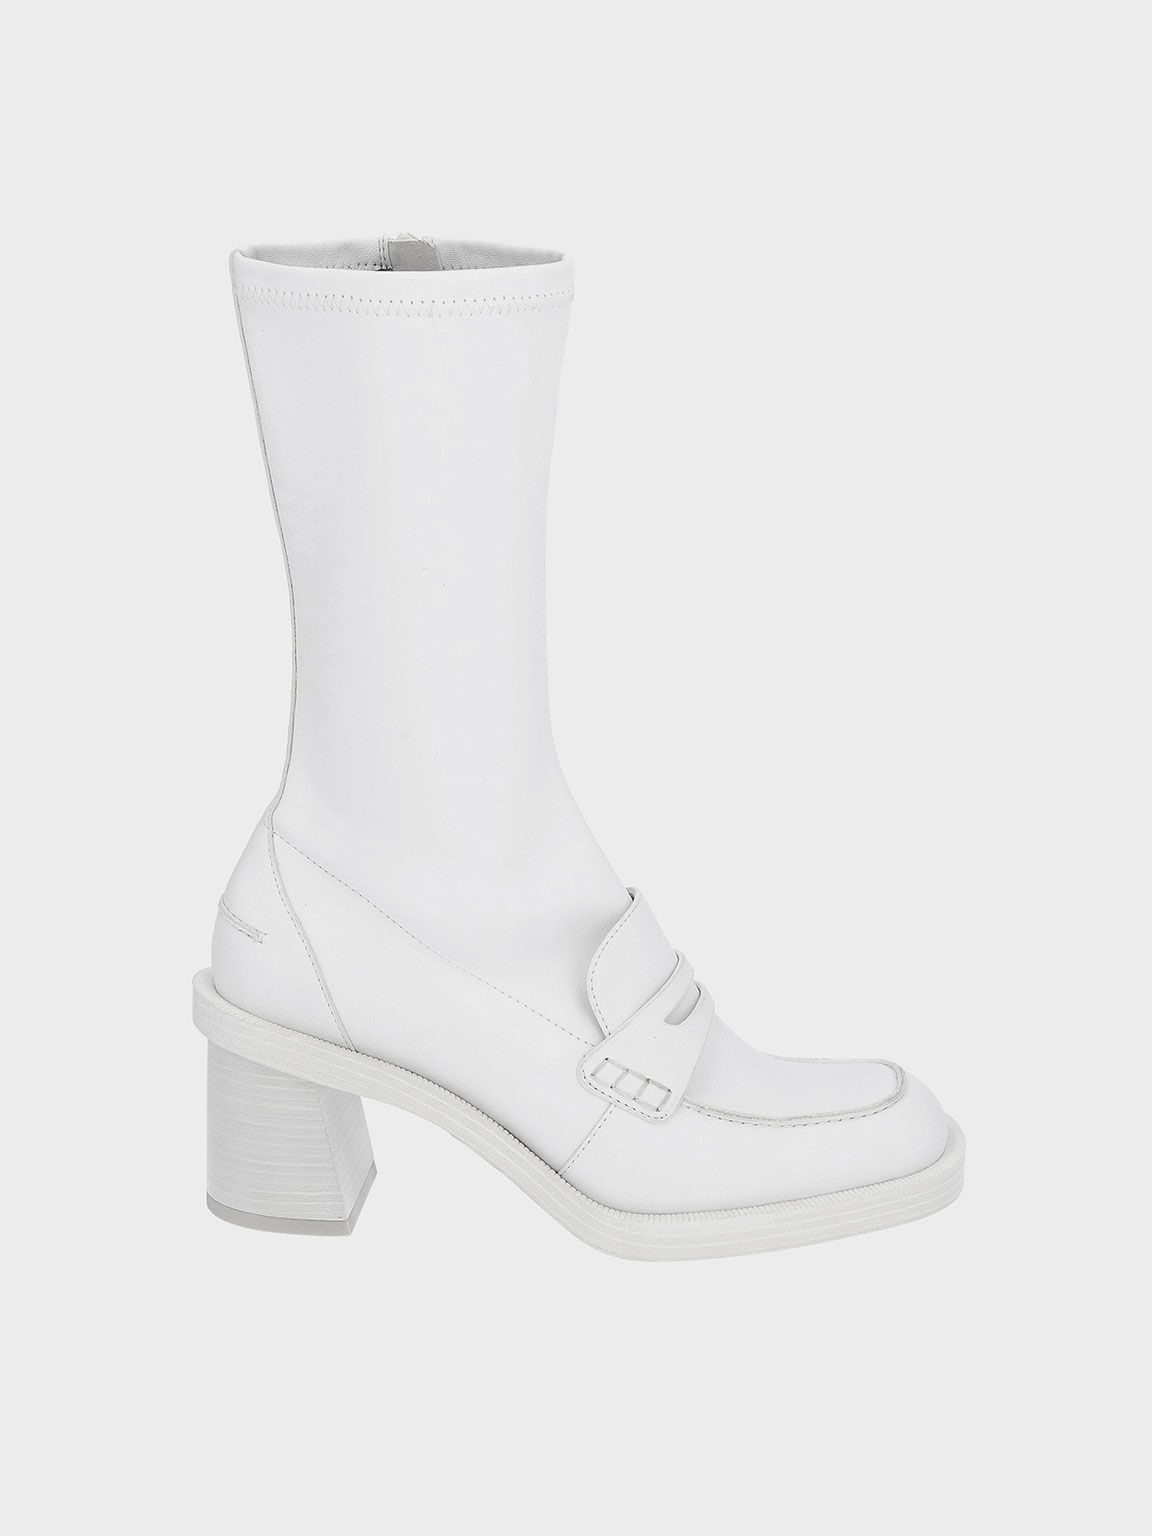 Haisley Penny Loafer Calf Boots, White, hi-res